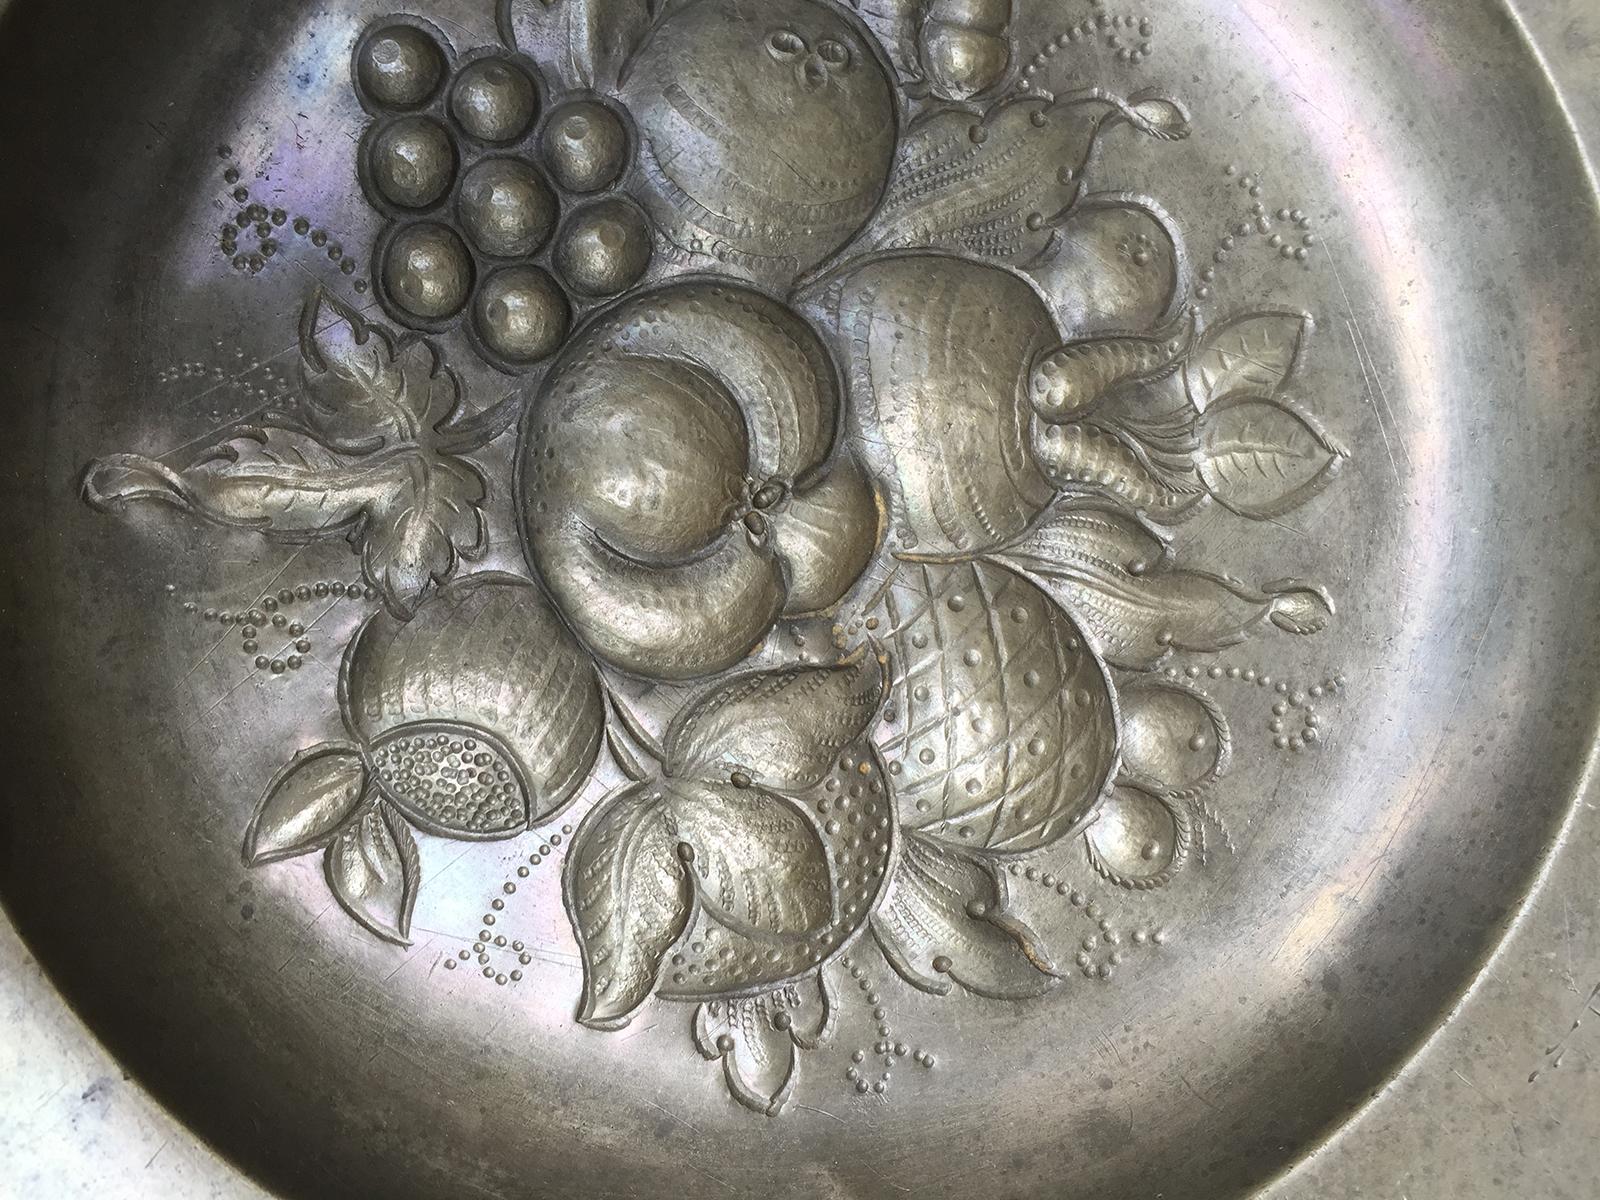 Pewter charger with fruit, possibly American, circa 1771
Eagle mark.